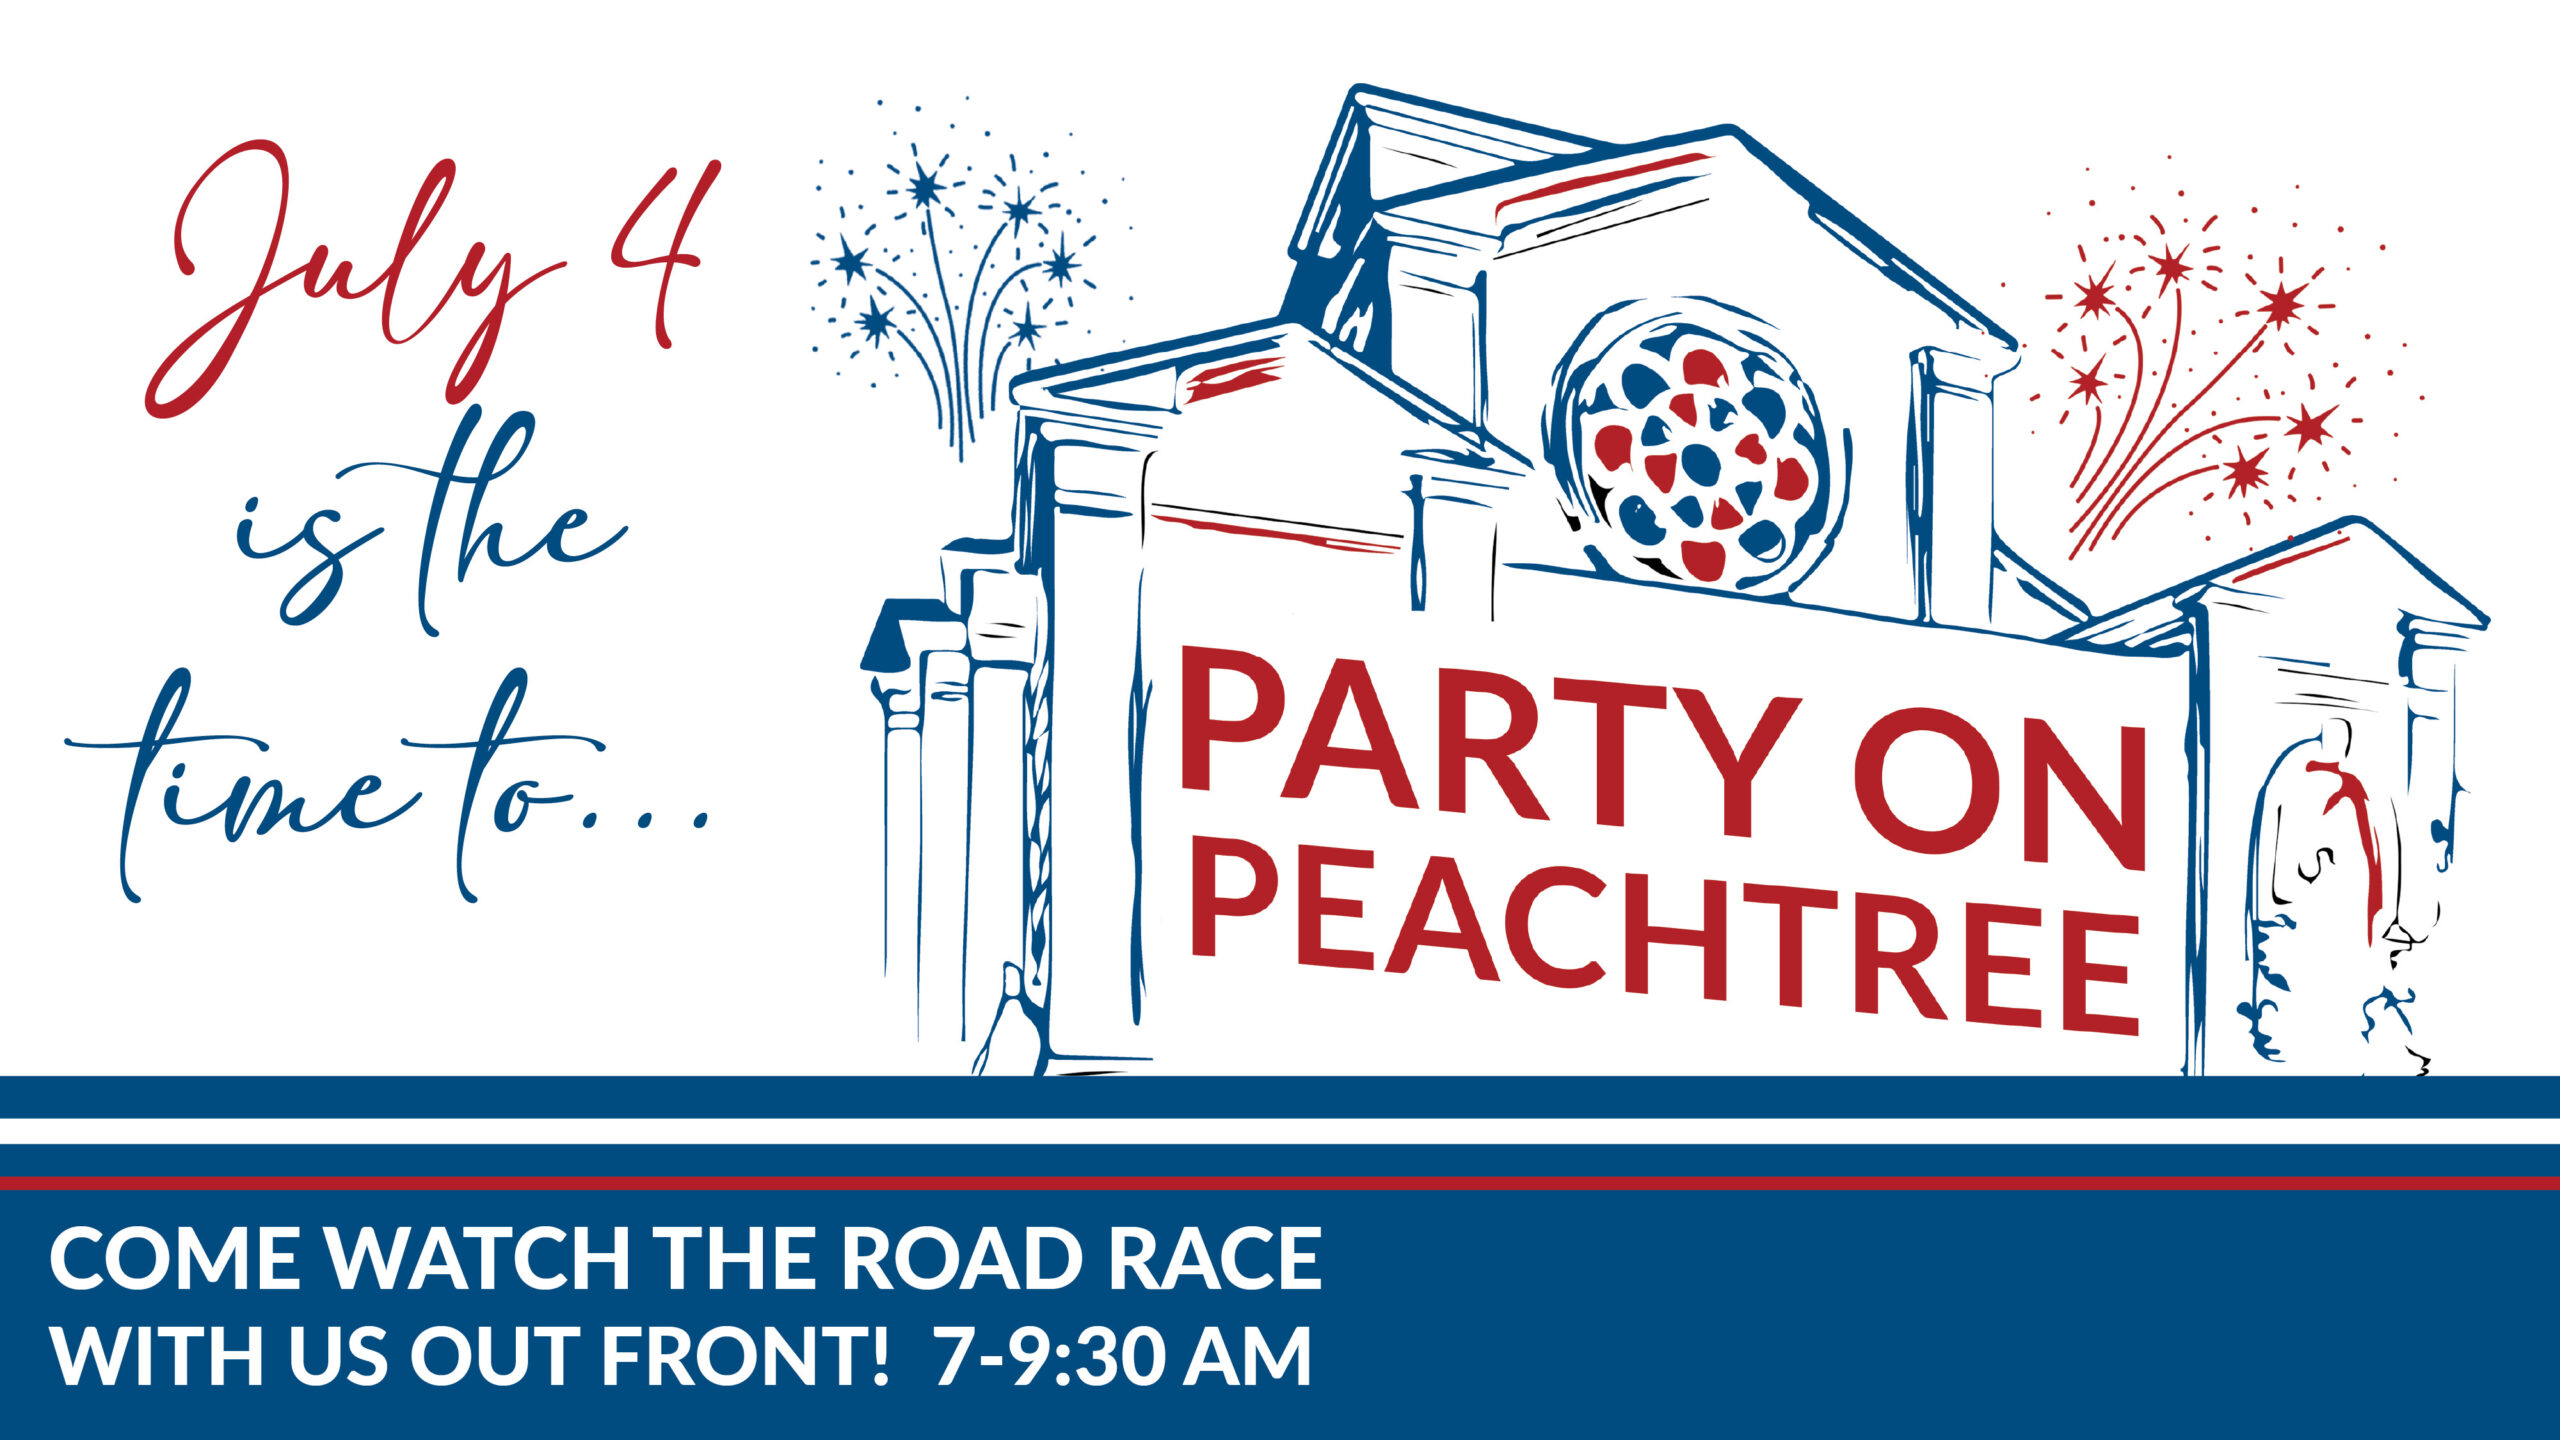 Party on Peachtree - PRUMC's Road Race viewing party!